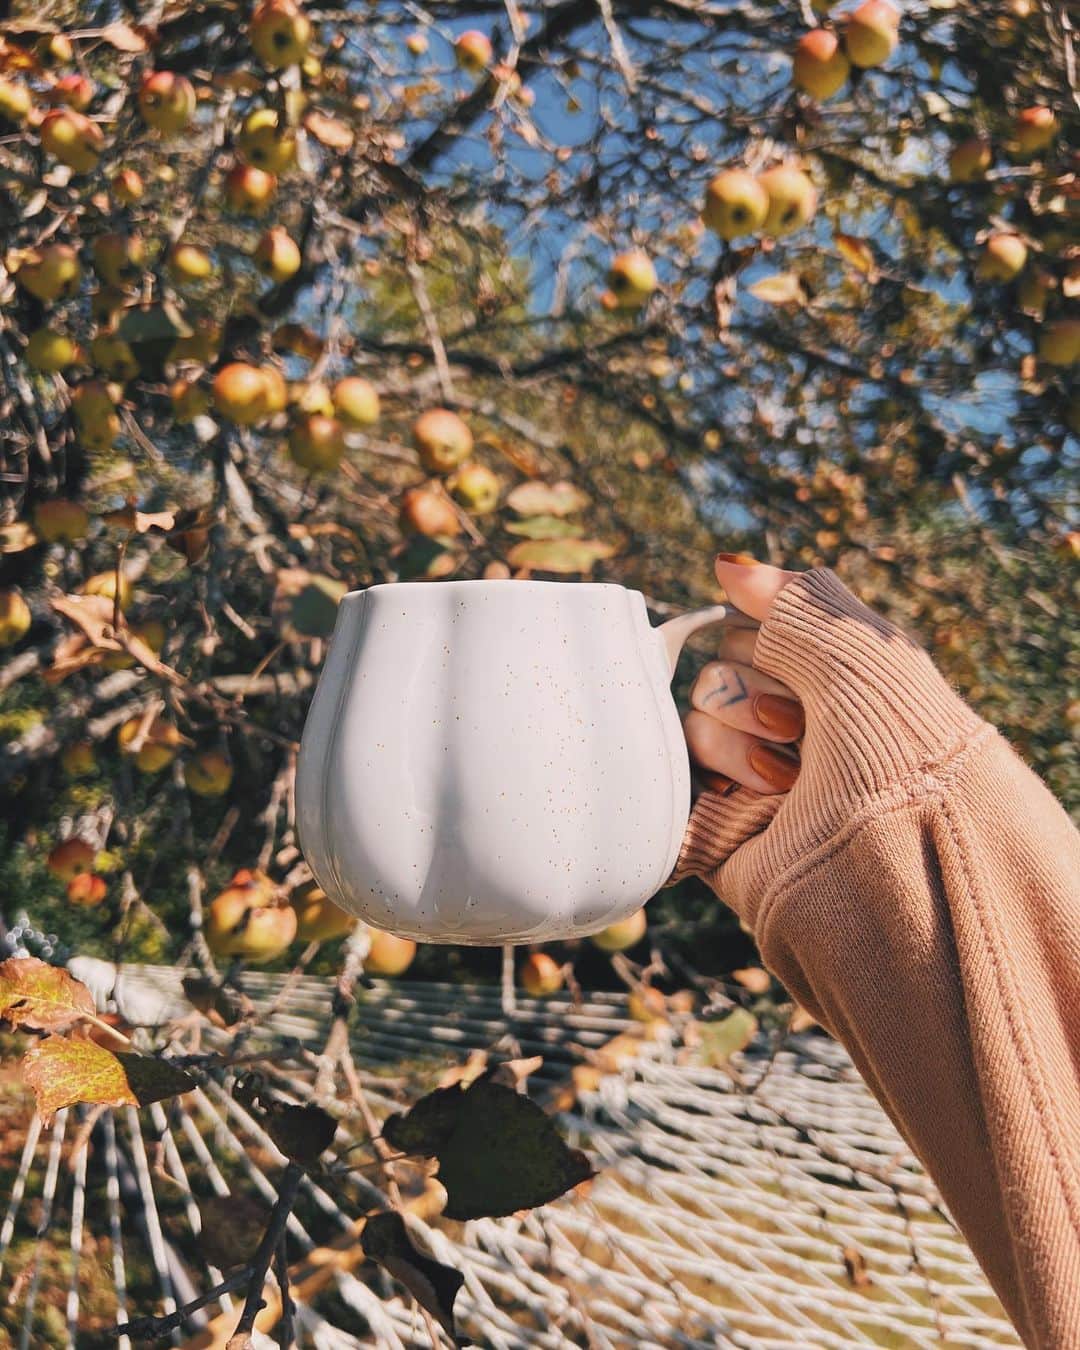 Kalyn Nicholsonのインスタグラム：「September mood board 🍂  1. A salted caramel latte by the apple tree outside. We got four tubs of apples, so I’m challenging myself to try as many apple-related recipes as I can all month.  2. Any waking moment I’m not in mom mode, this is where I’ll be. Hot tea, headphones and many work hours ahead of me.  3. Doing weekly bonfires at the house to work through our burn pile. Plus, it doubles as an inexpensive, ambient date night, no babysitter required.  4. September always makes me want to read Anne of Green Gables. It has such a golden, nostalgic sense and beautiful atmospheric writing that reads like a warm hug in a sunset-feeling month. Book 2 is my current fiction read.  5. Savouring these morning walks, especially as the leaves are just starting to change, knowing in a few weeks time it’ll be too cold, and I’ll envy this ability.  6. Just some pretty September words found on Pinterest.」